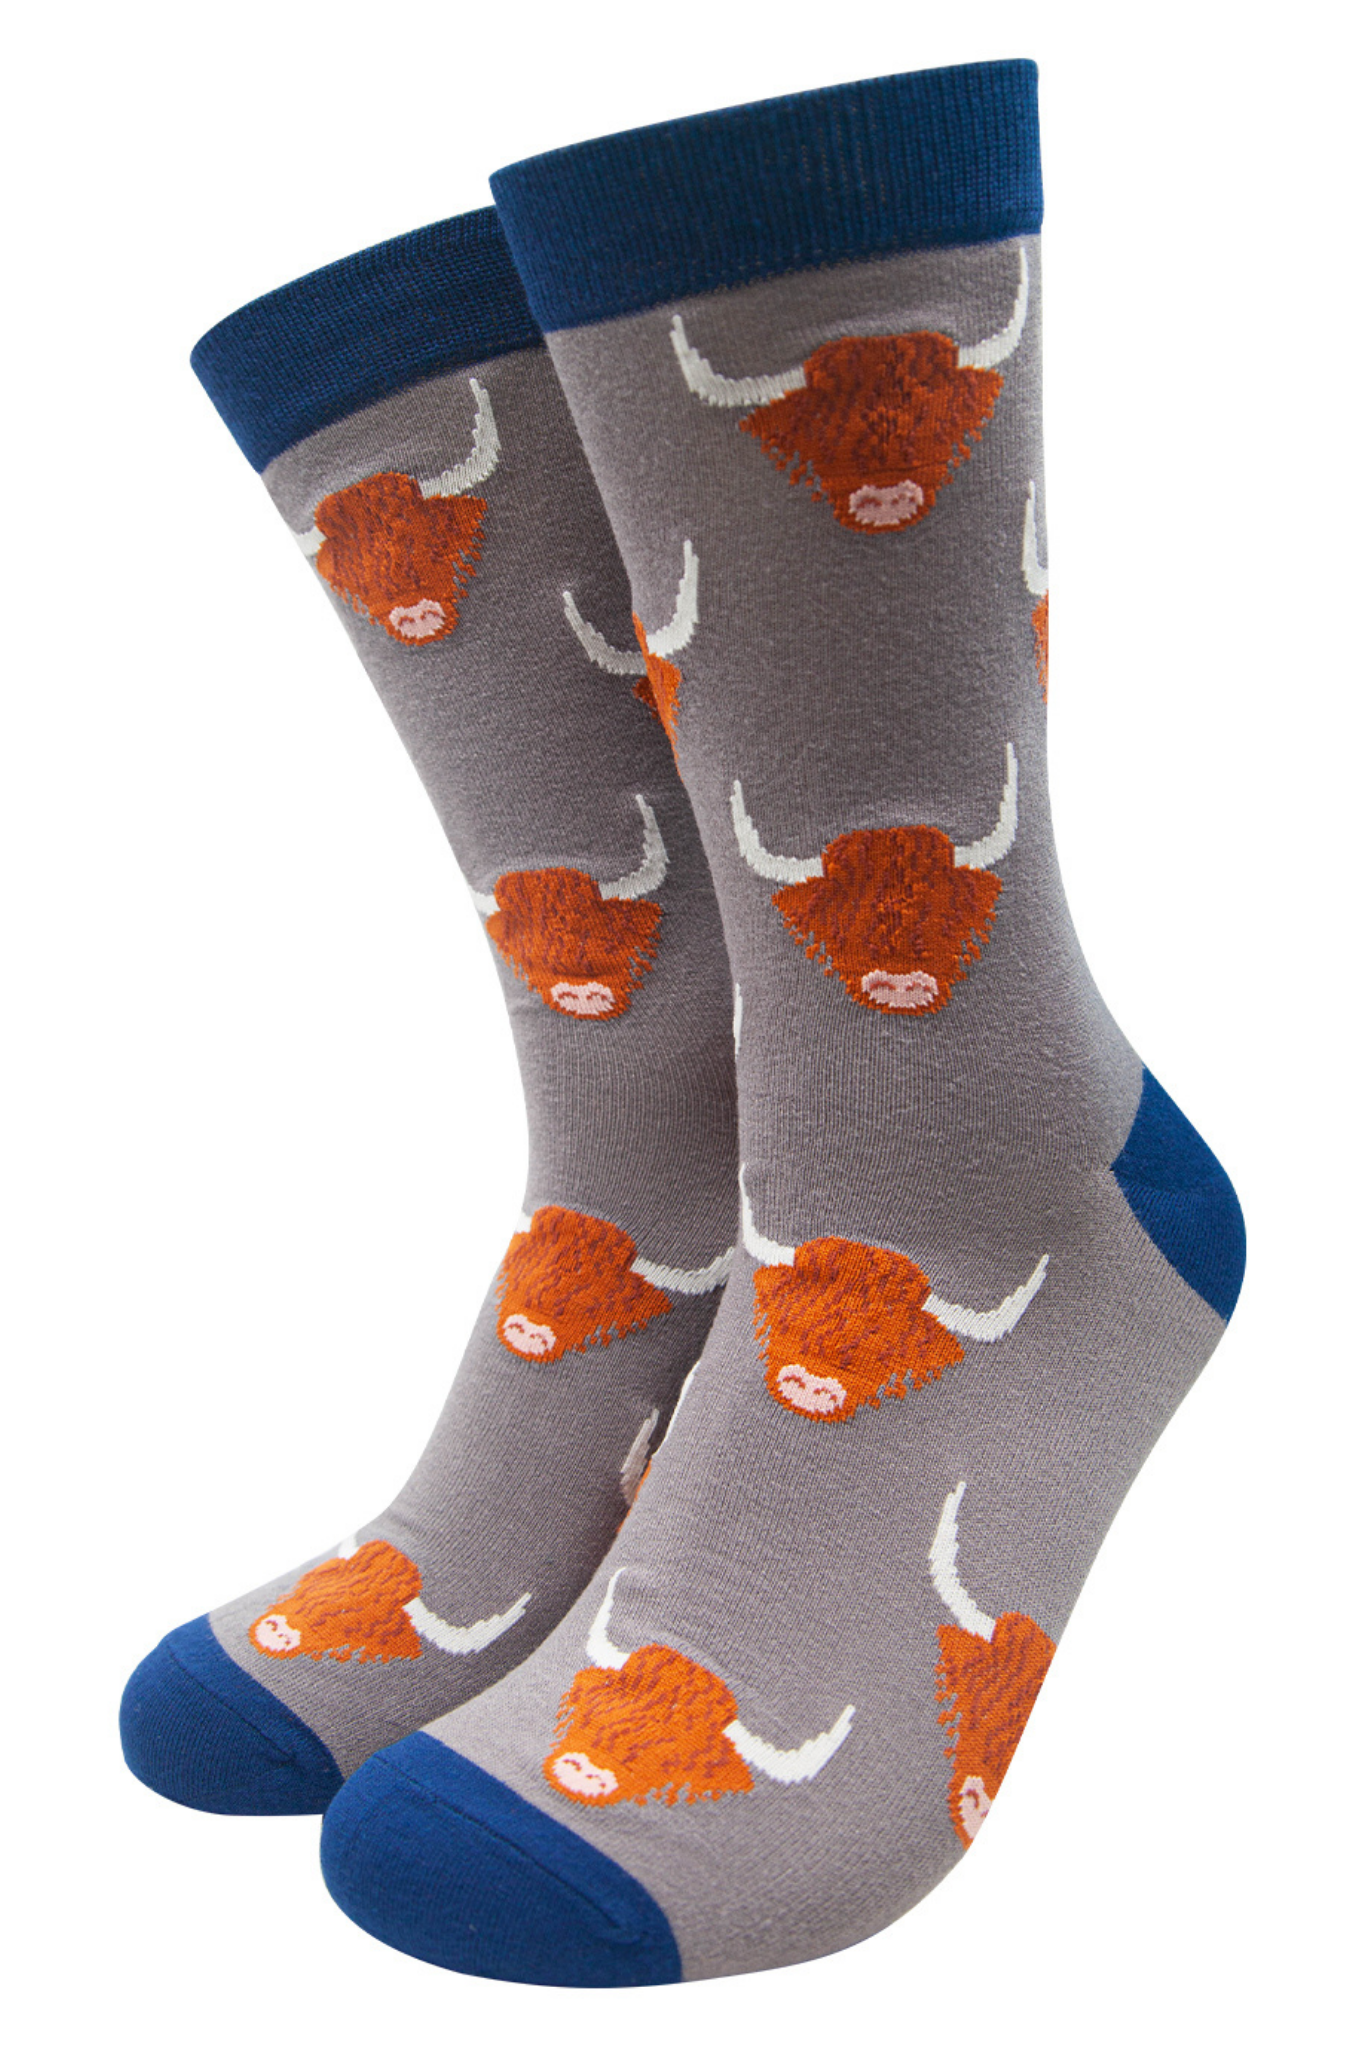 grey bamboo socks with blue toe, heel and trim with all over pattern of highland cows